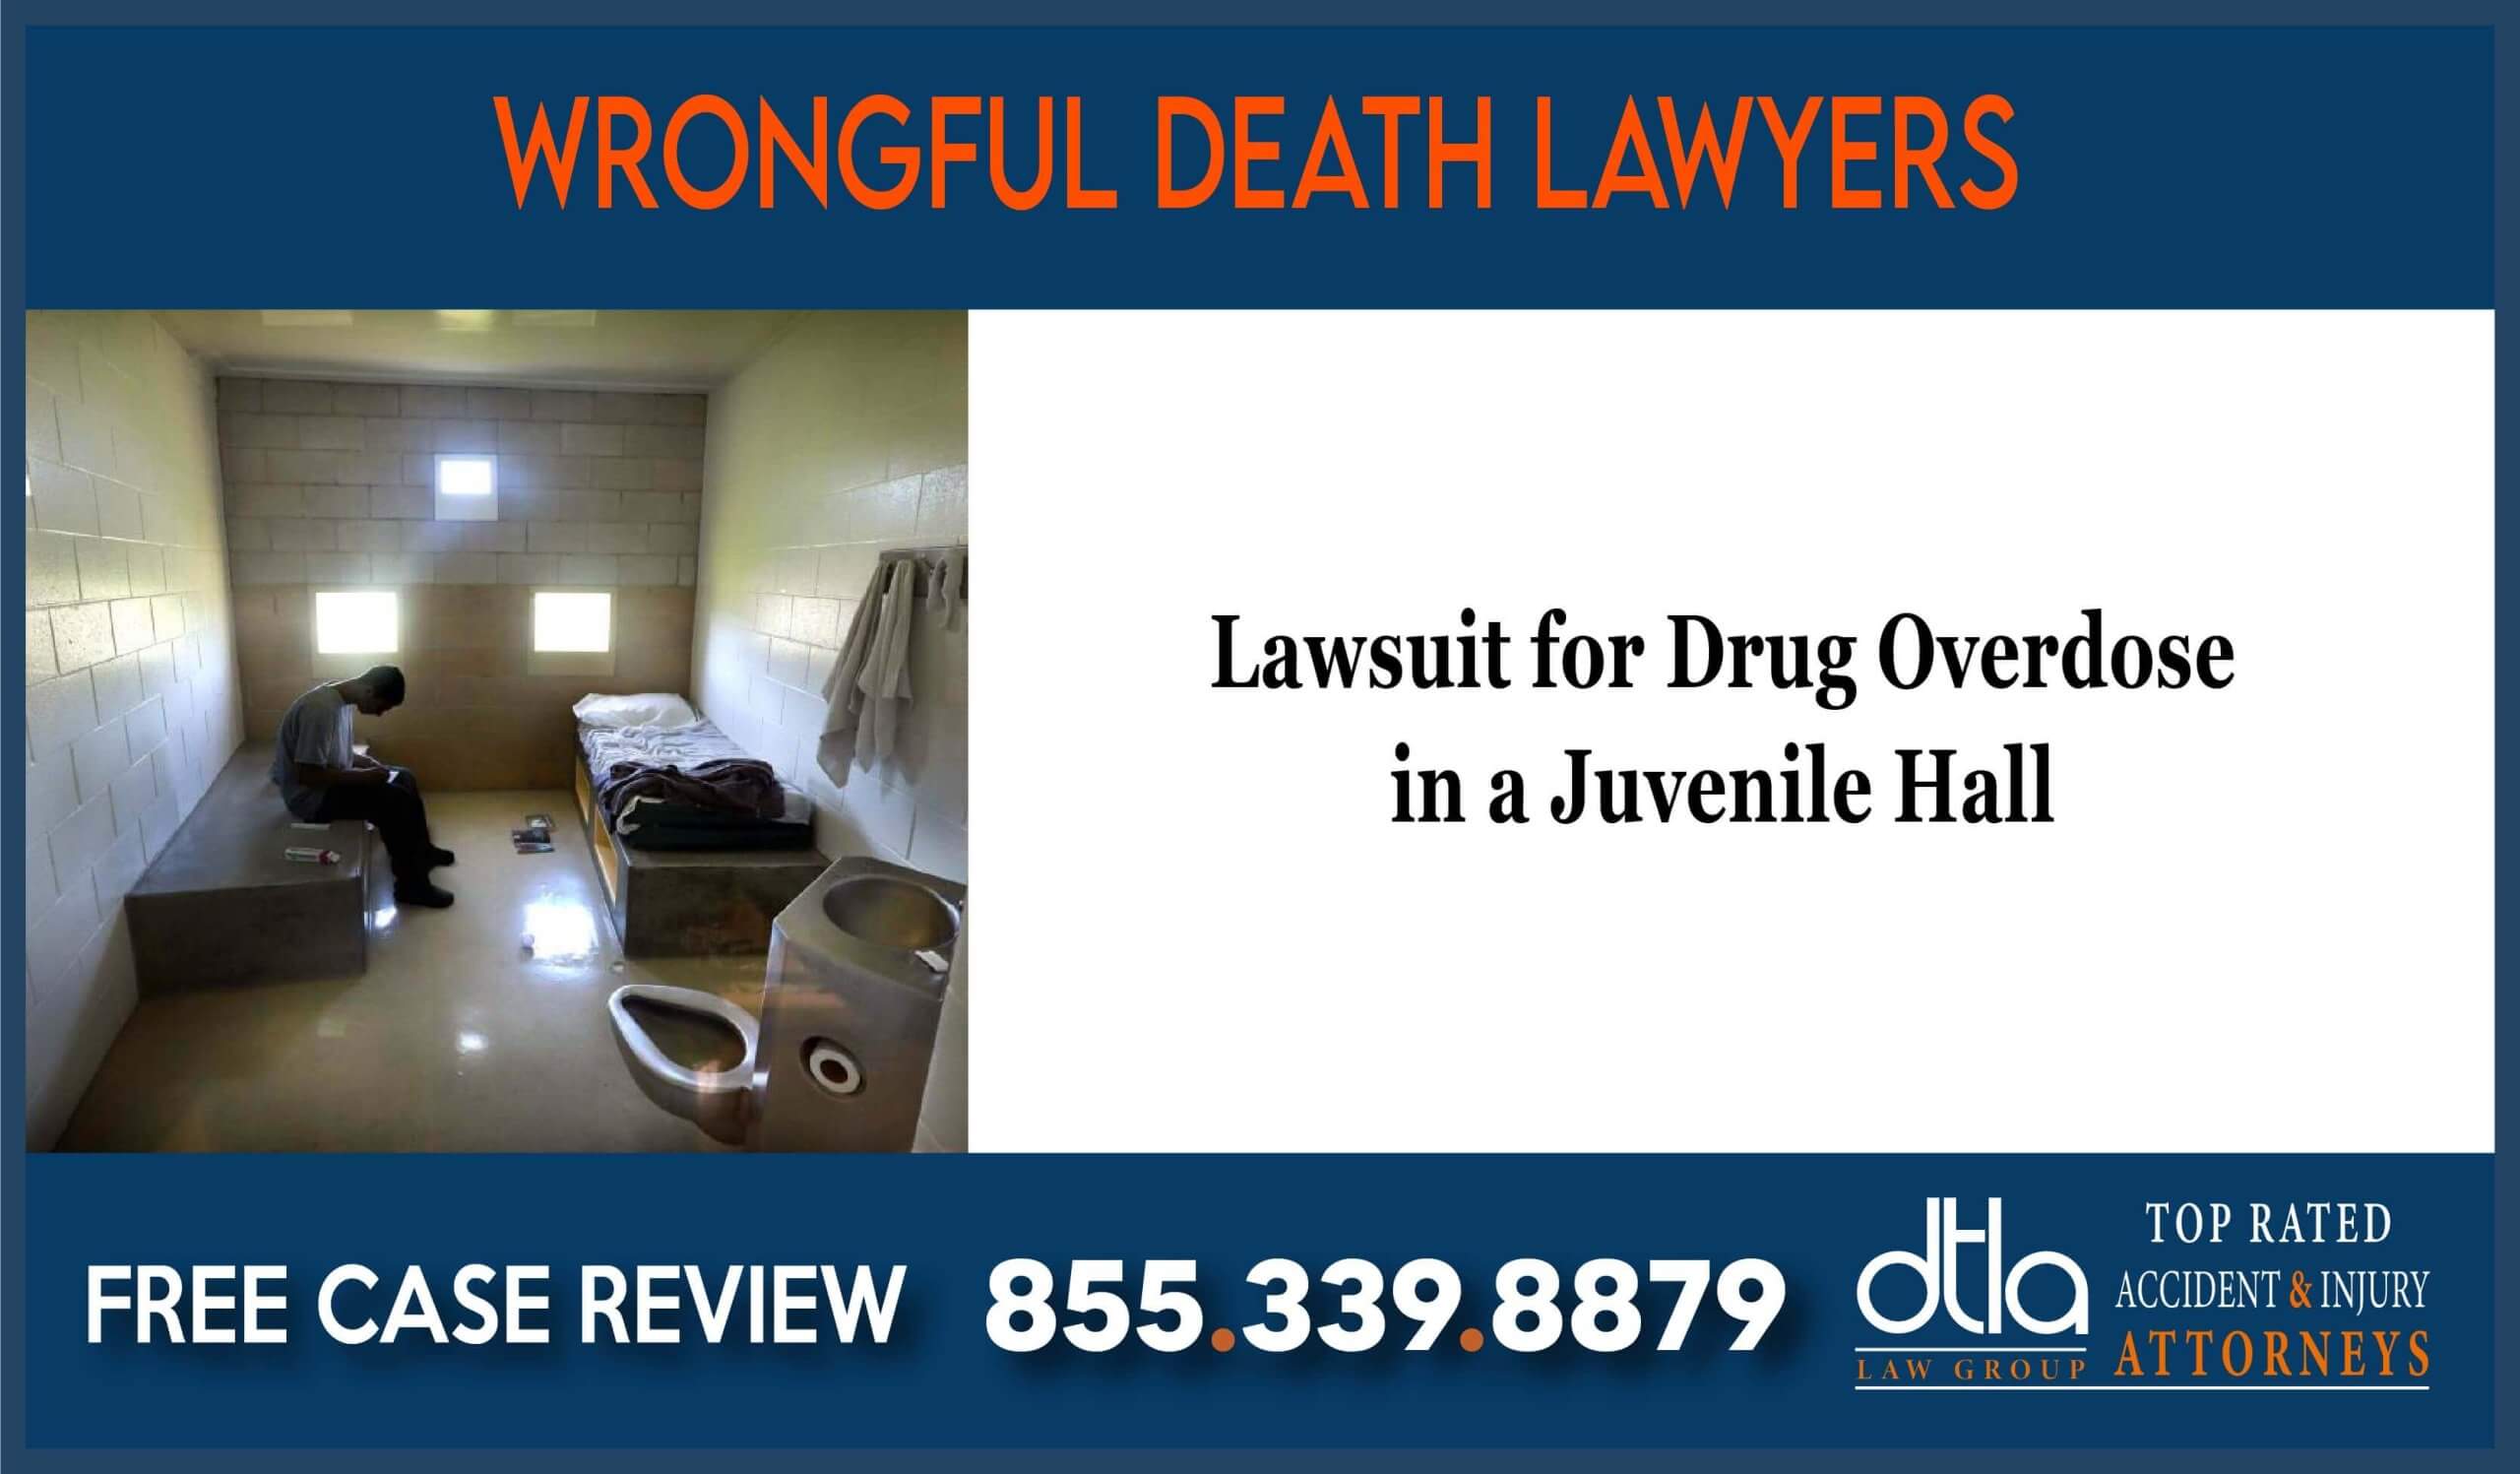 Lawsuit for Drug Overdose in a Juvenile Hall wrongful death lawyer attorney sue